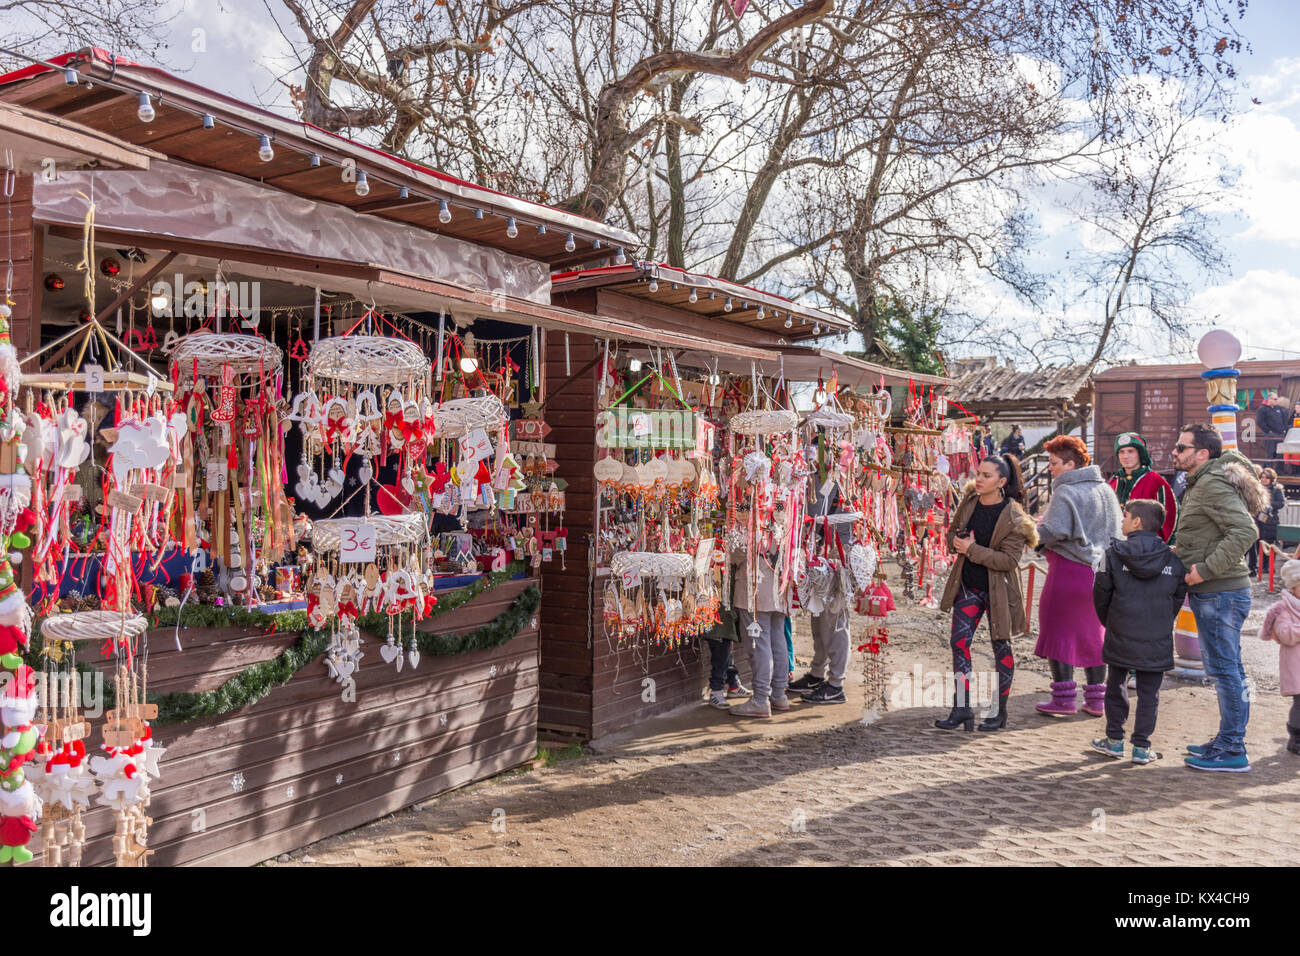 People holidaying at the Mill of Elves, a popular Christmas destination in Trikala Greece. Stock Photo